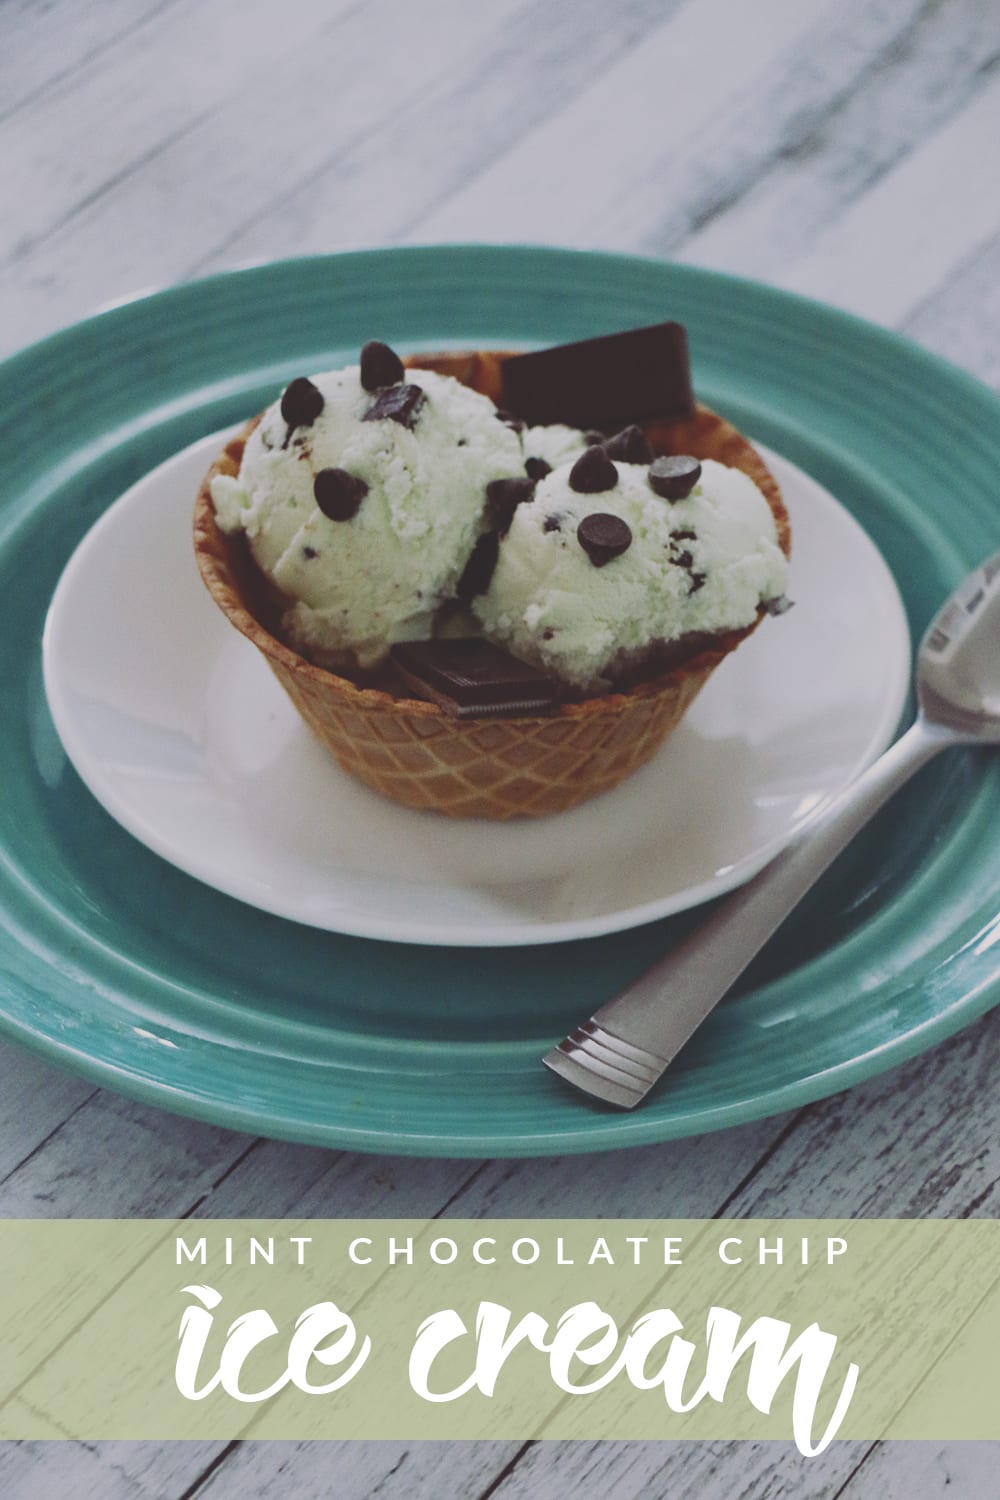 Mint Chocolate Chip Ice Cream just got better. This easy recipe is perfect to make at home and just the right amount of mint and chocolate!